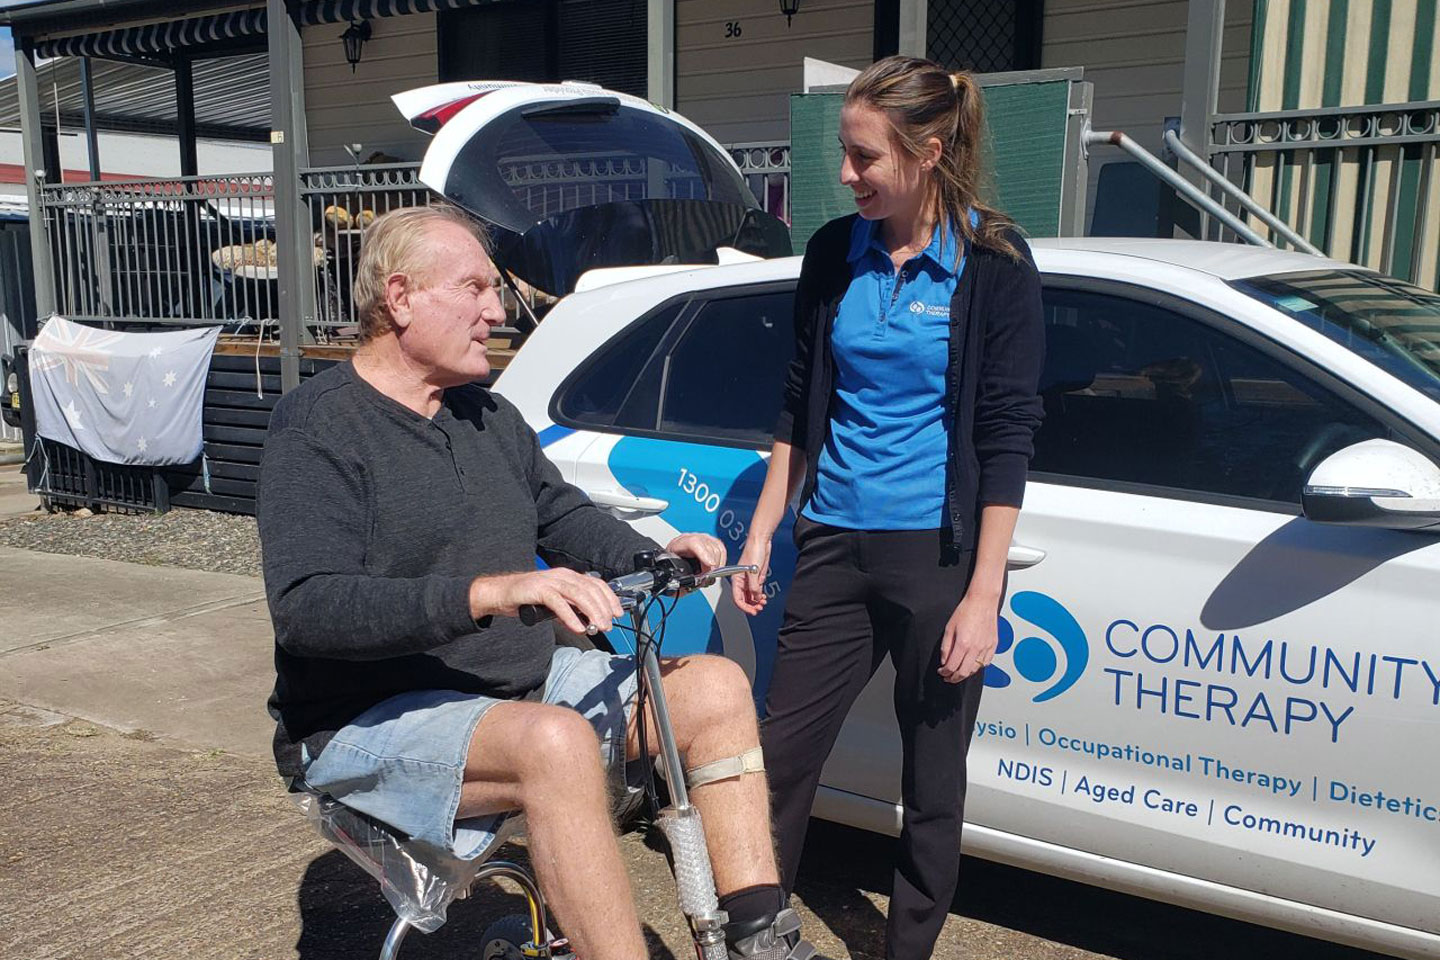 Occupational Therapist and NDIS client trialling a portable scooter with a Community Therapy branded car in the background